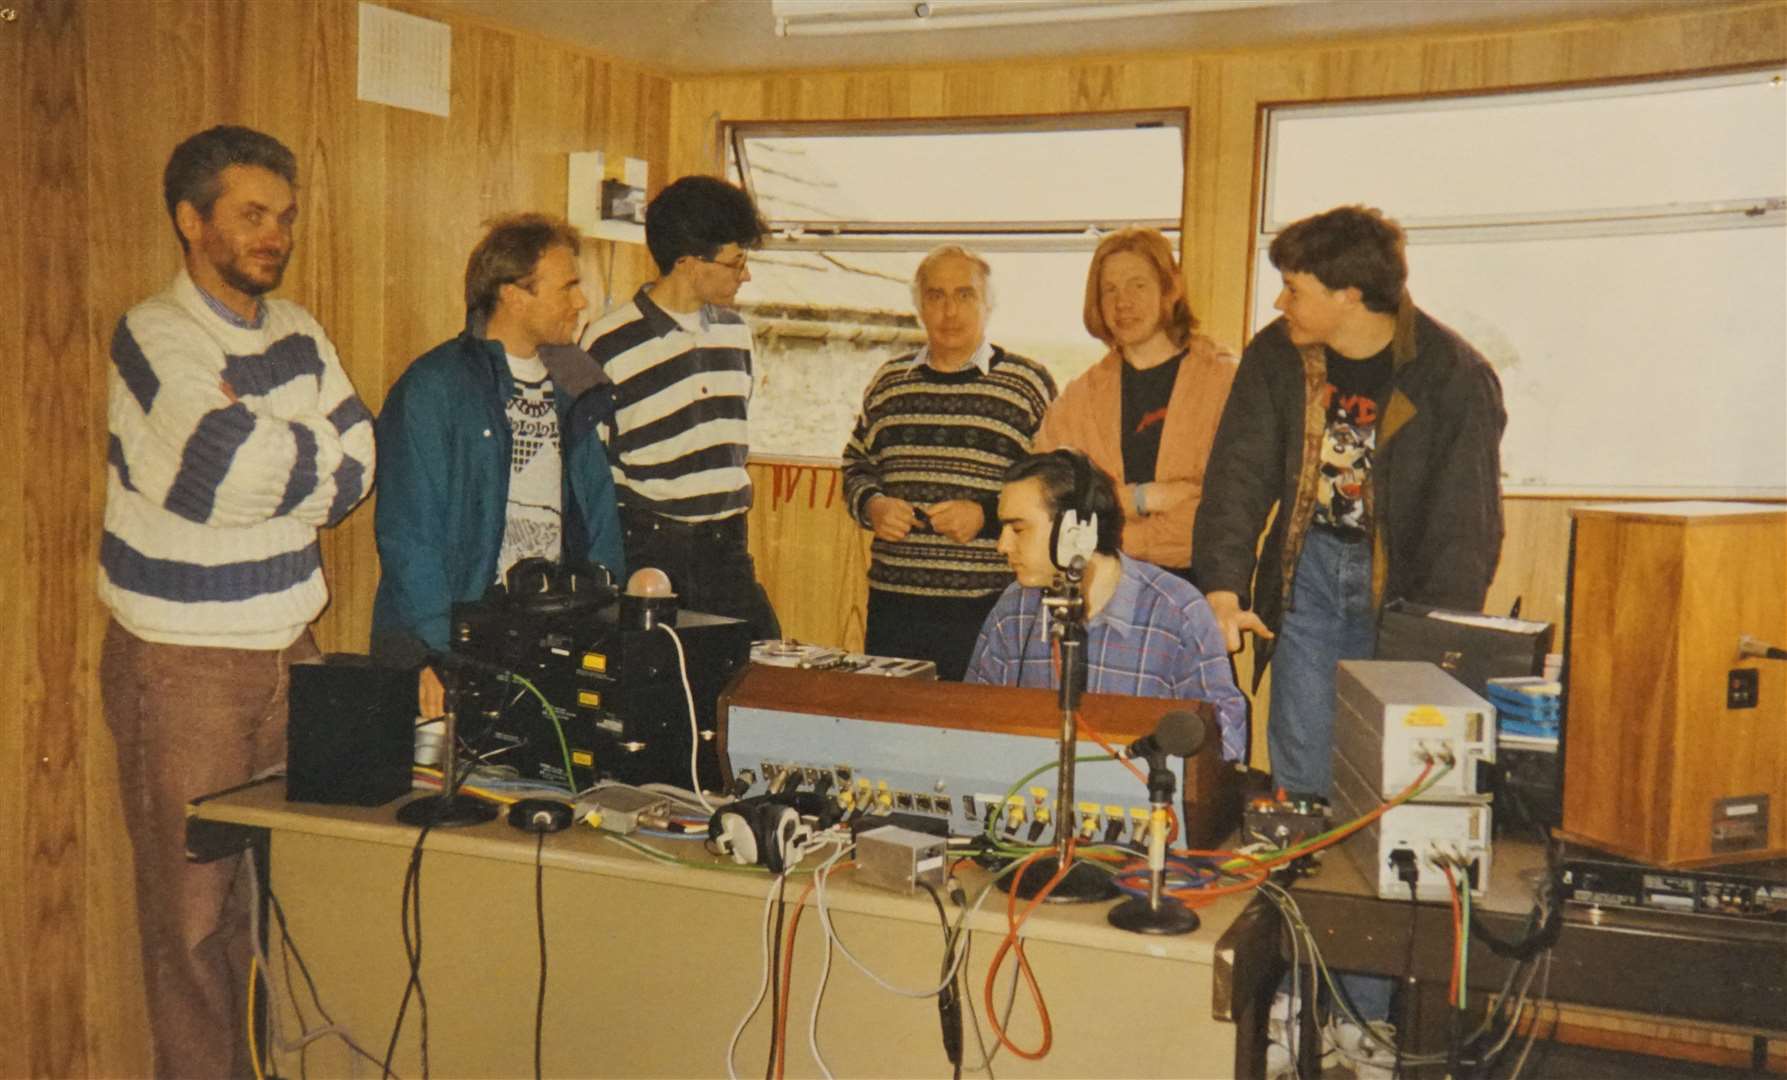 A blast from the past in the early days of Caithness FM.